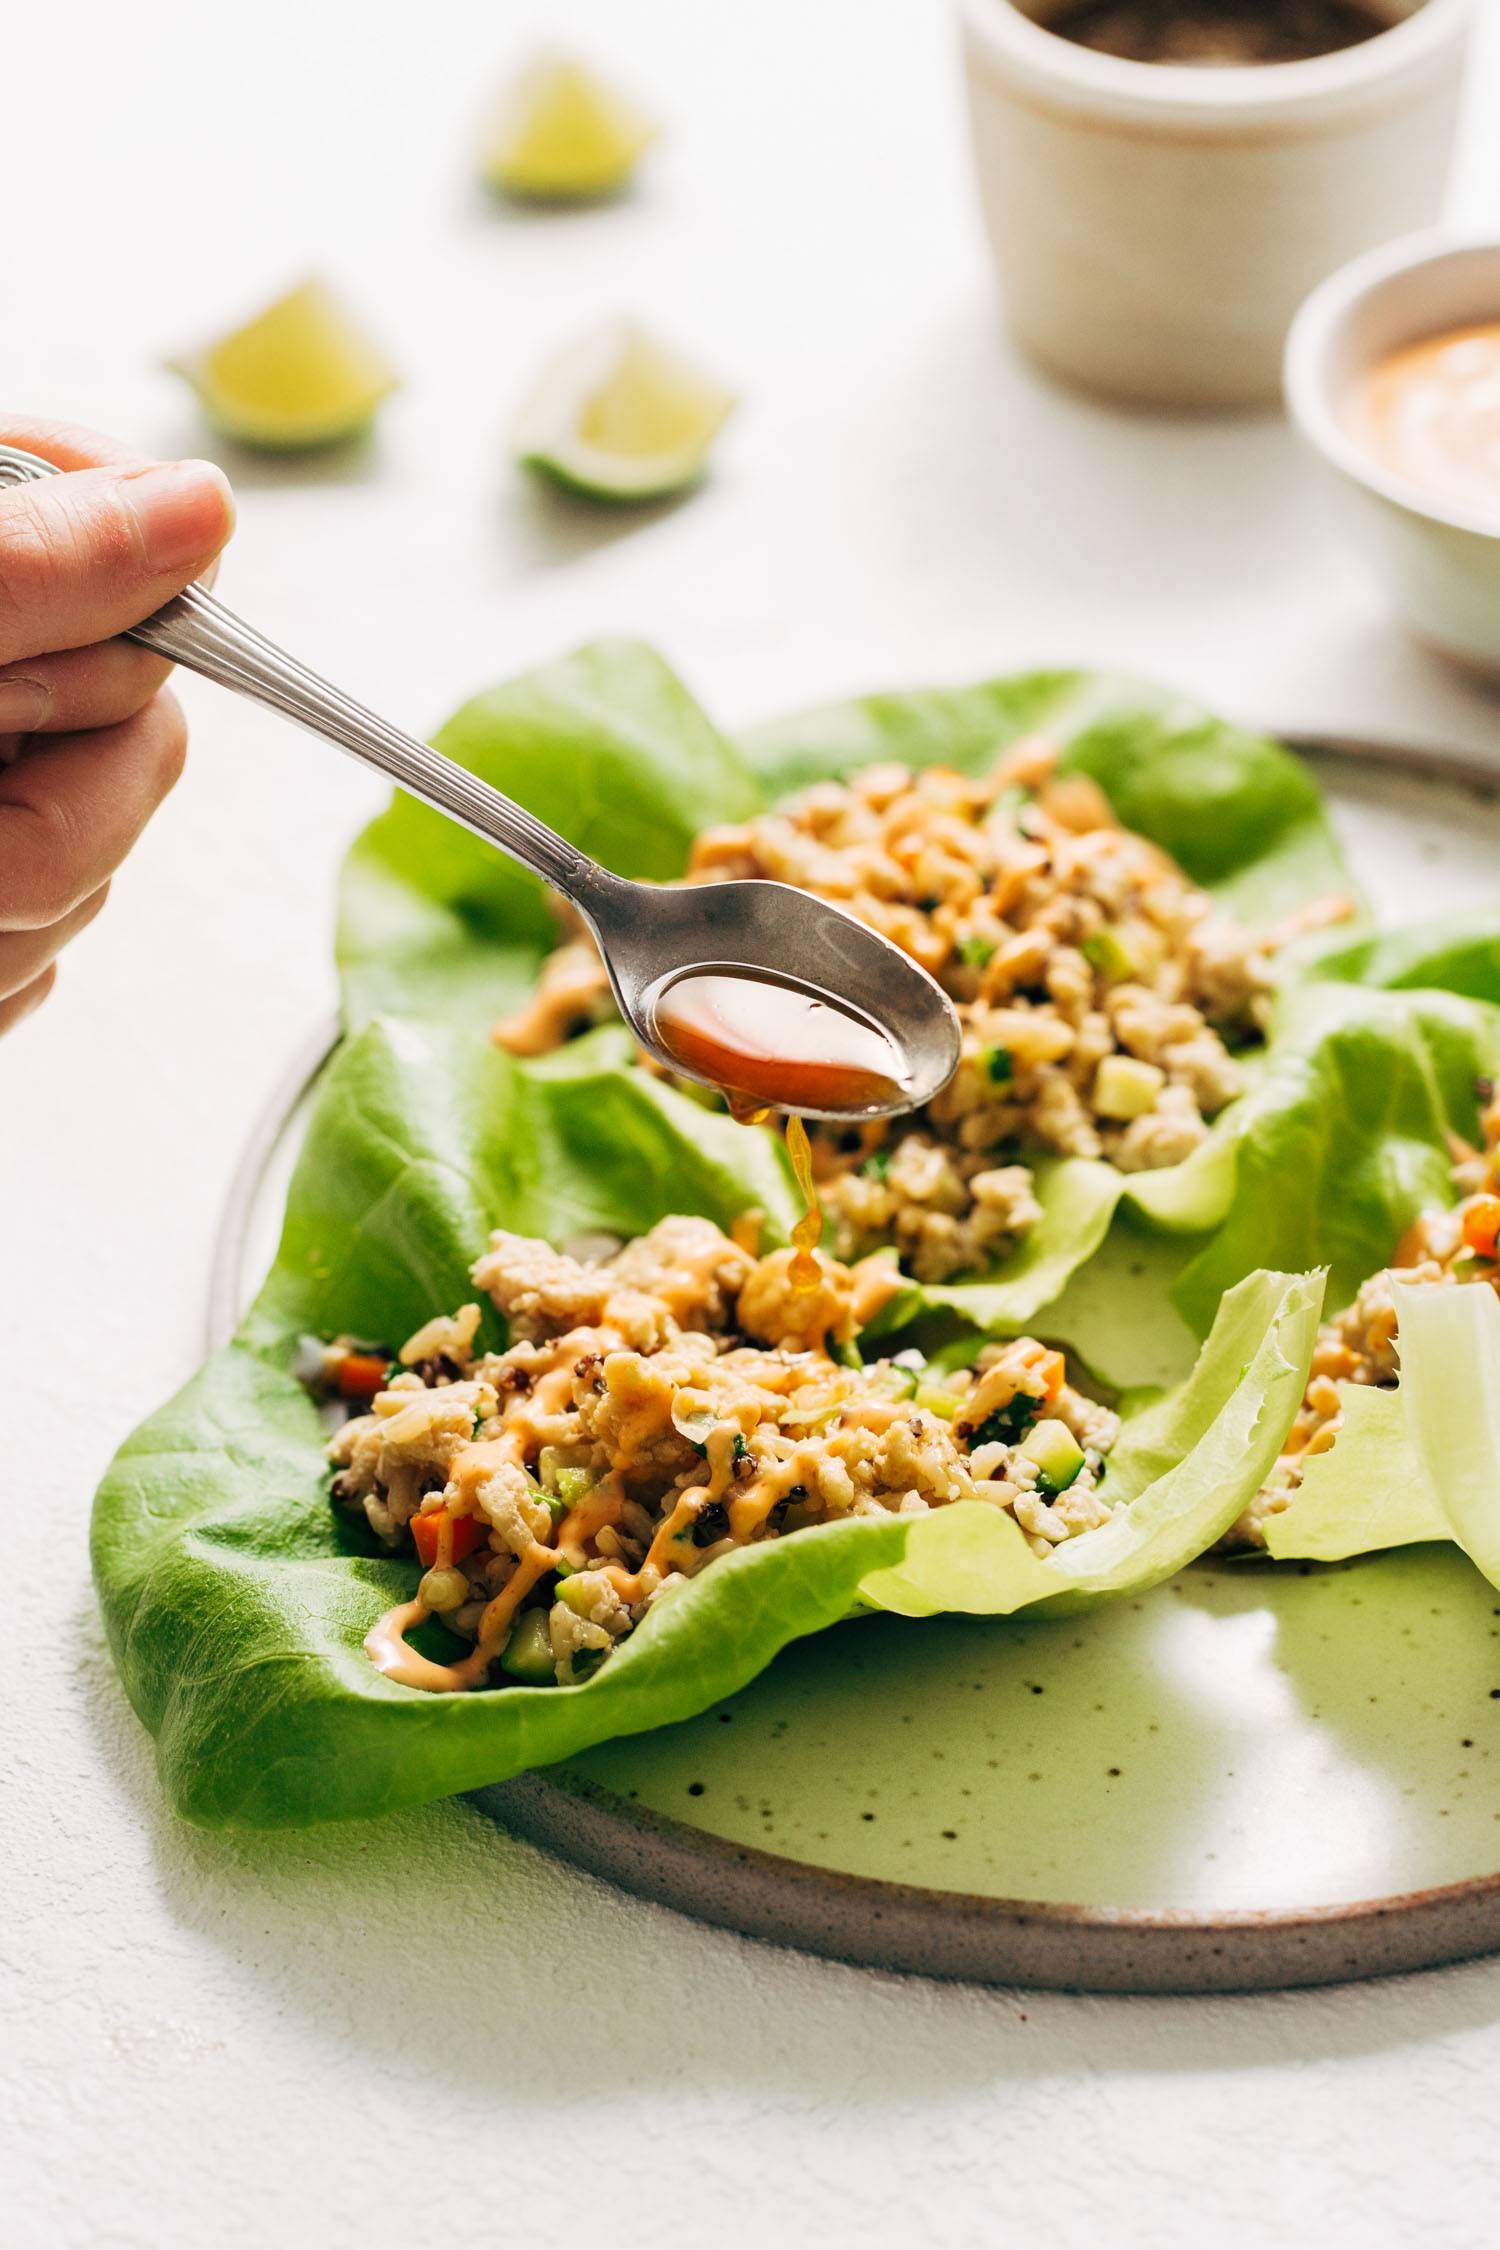 Chicken lettuce wraps on a plate with a lime drench sauce poured over the top